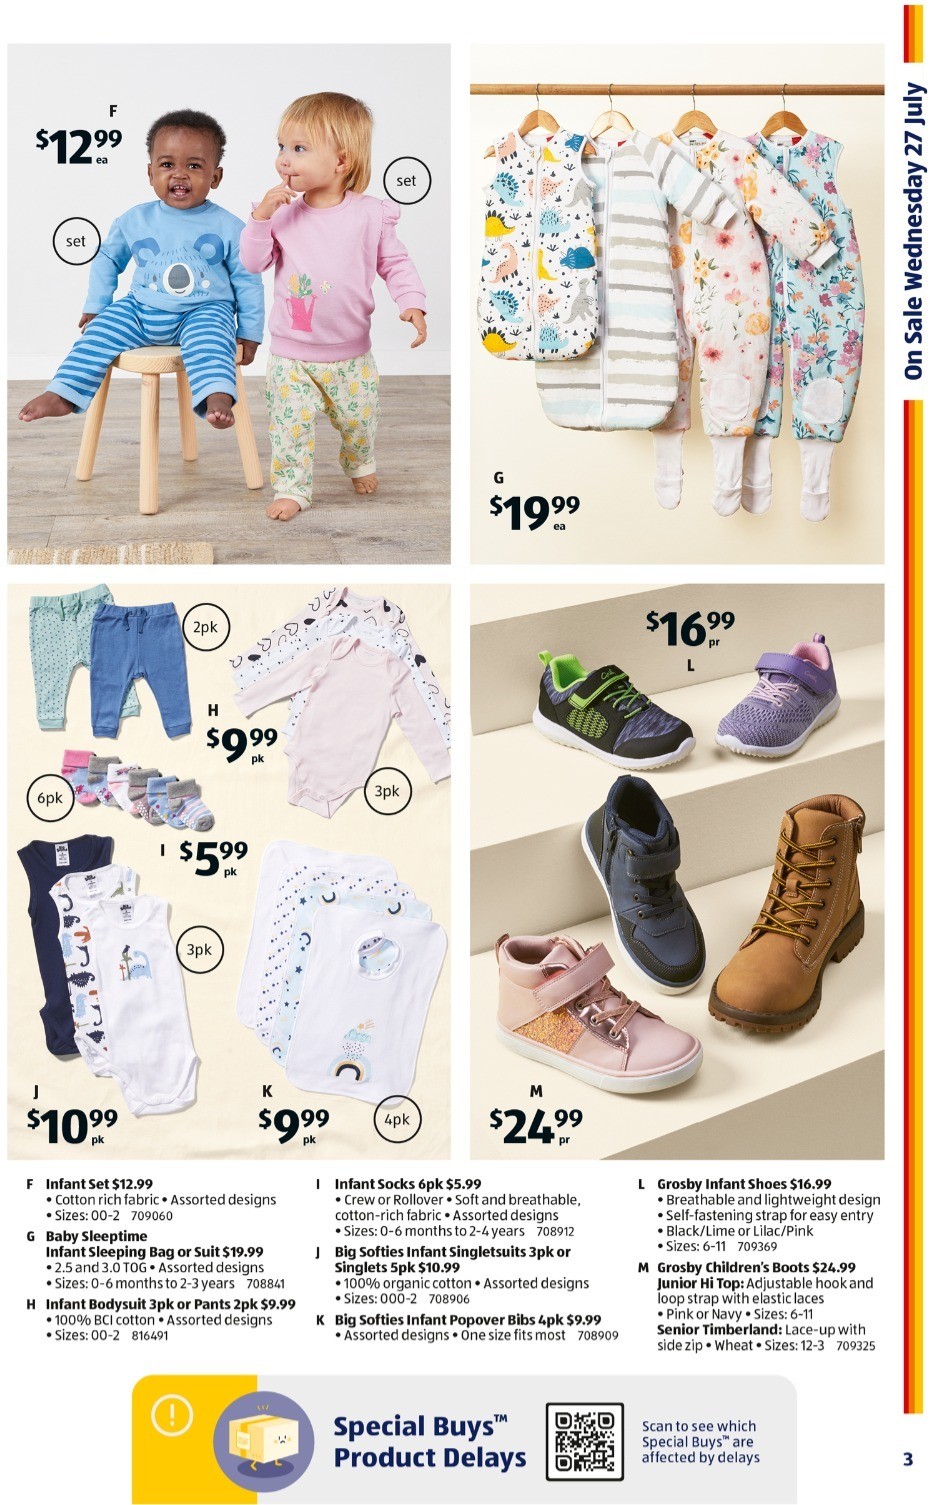 ALDI Catalogues from 27 July